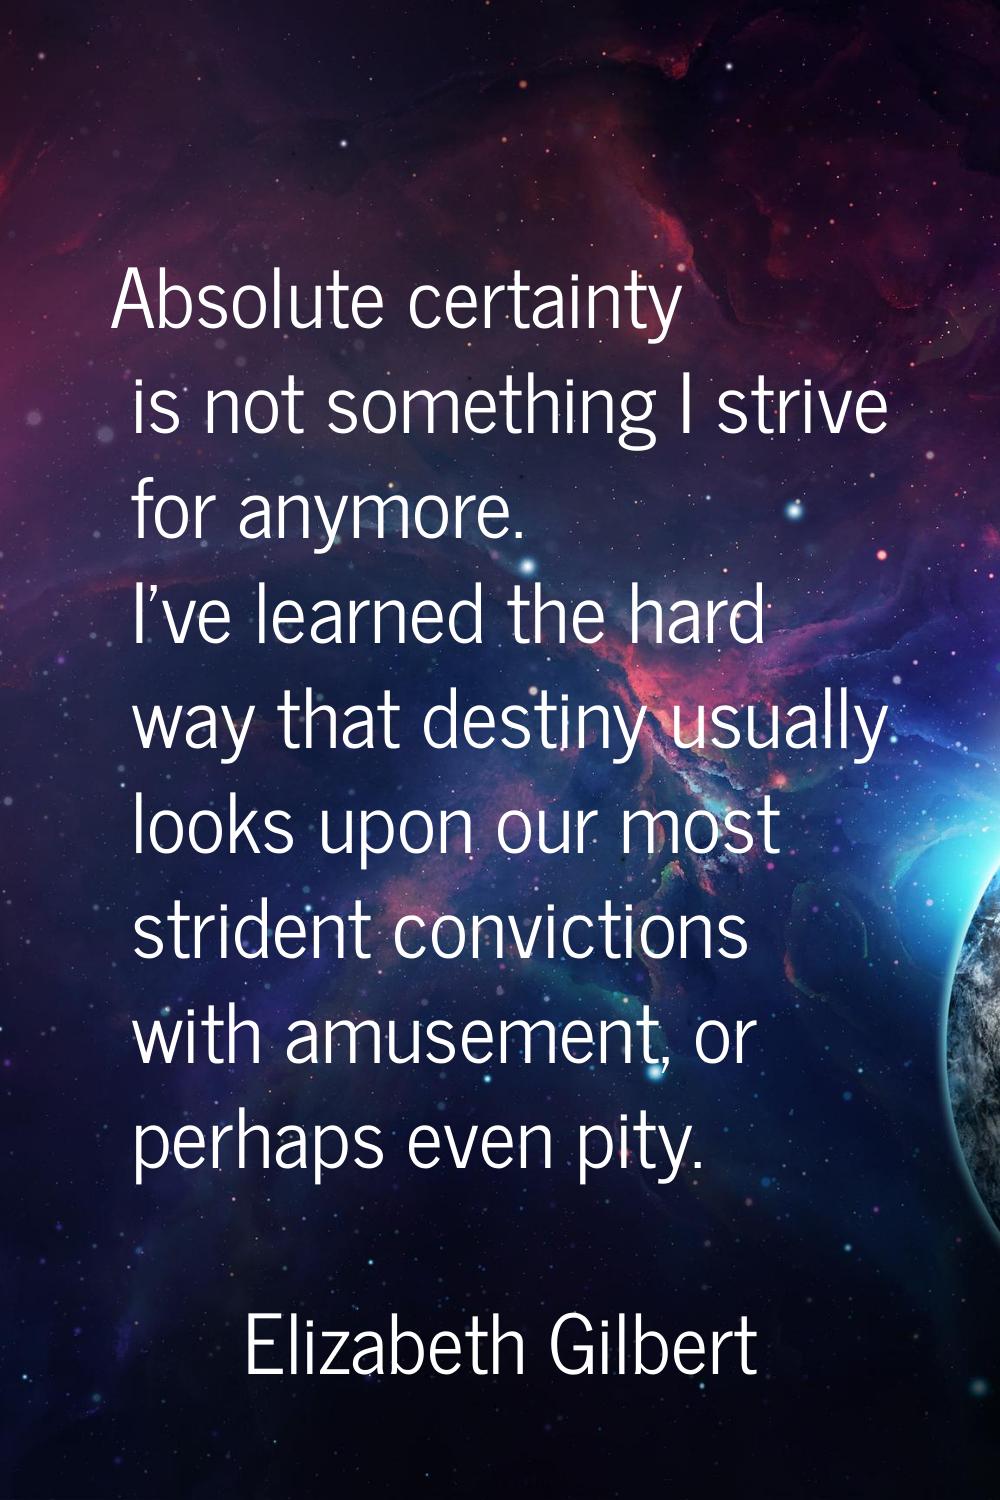 Absolute certainty is not something I strive for anymore. I've learned the hard way that destiny us